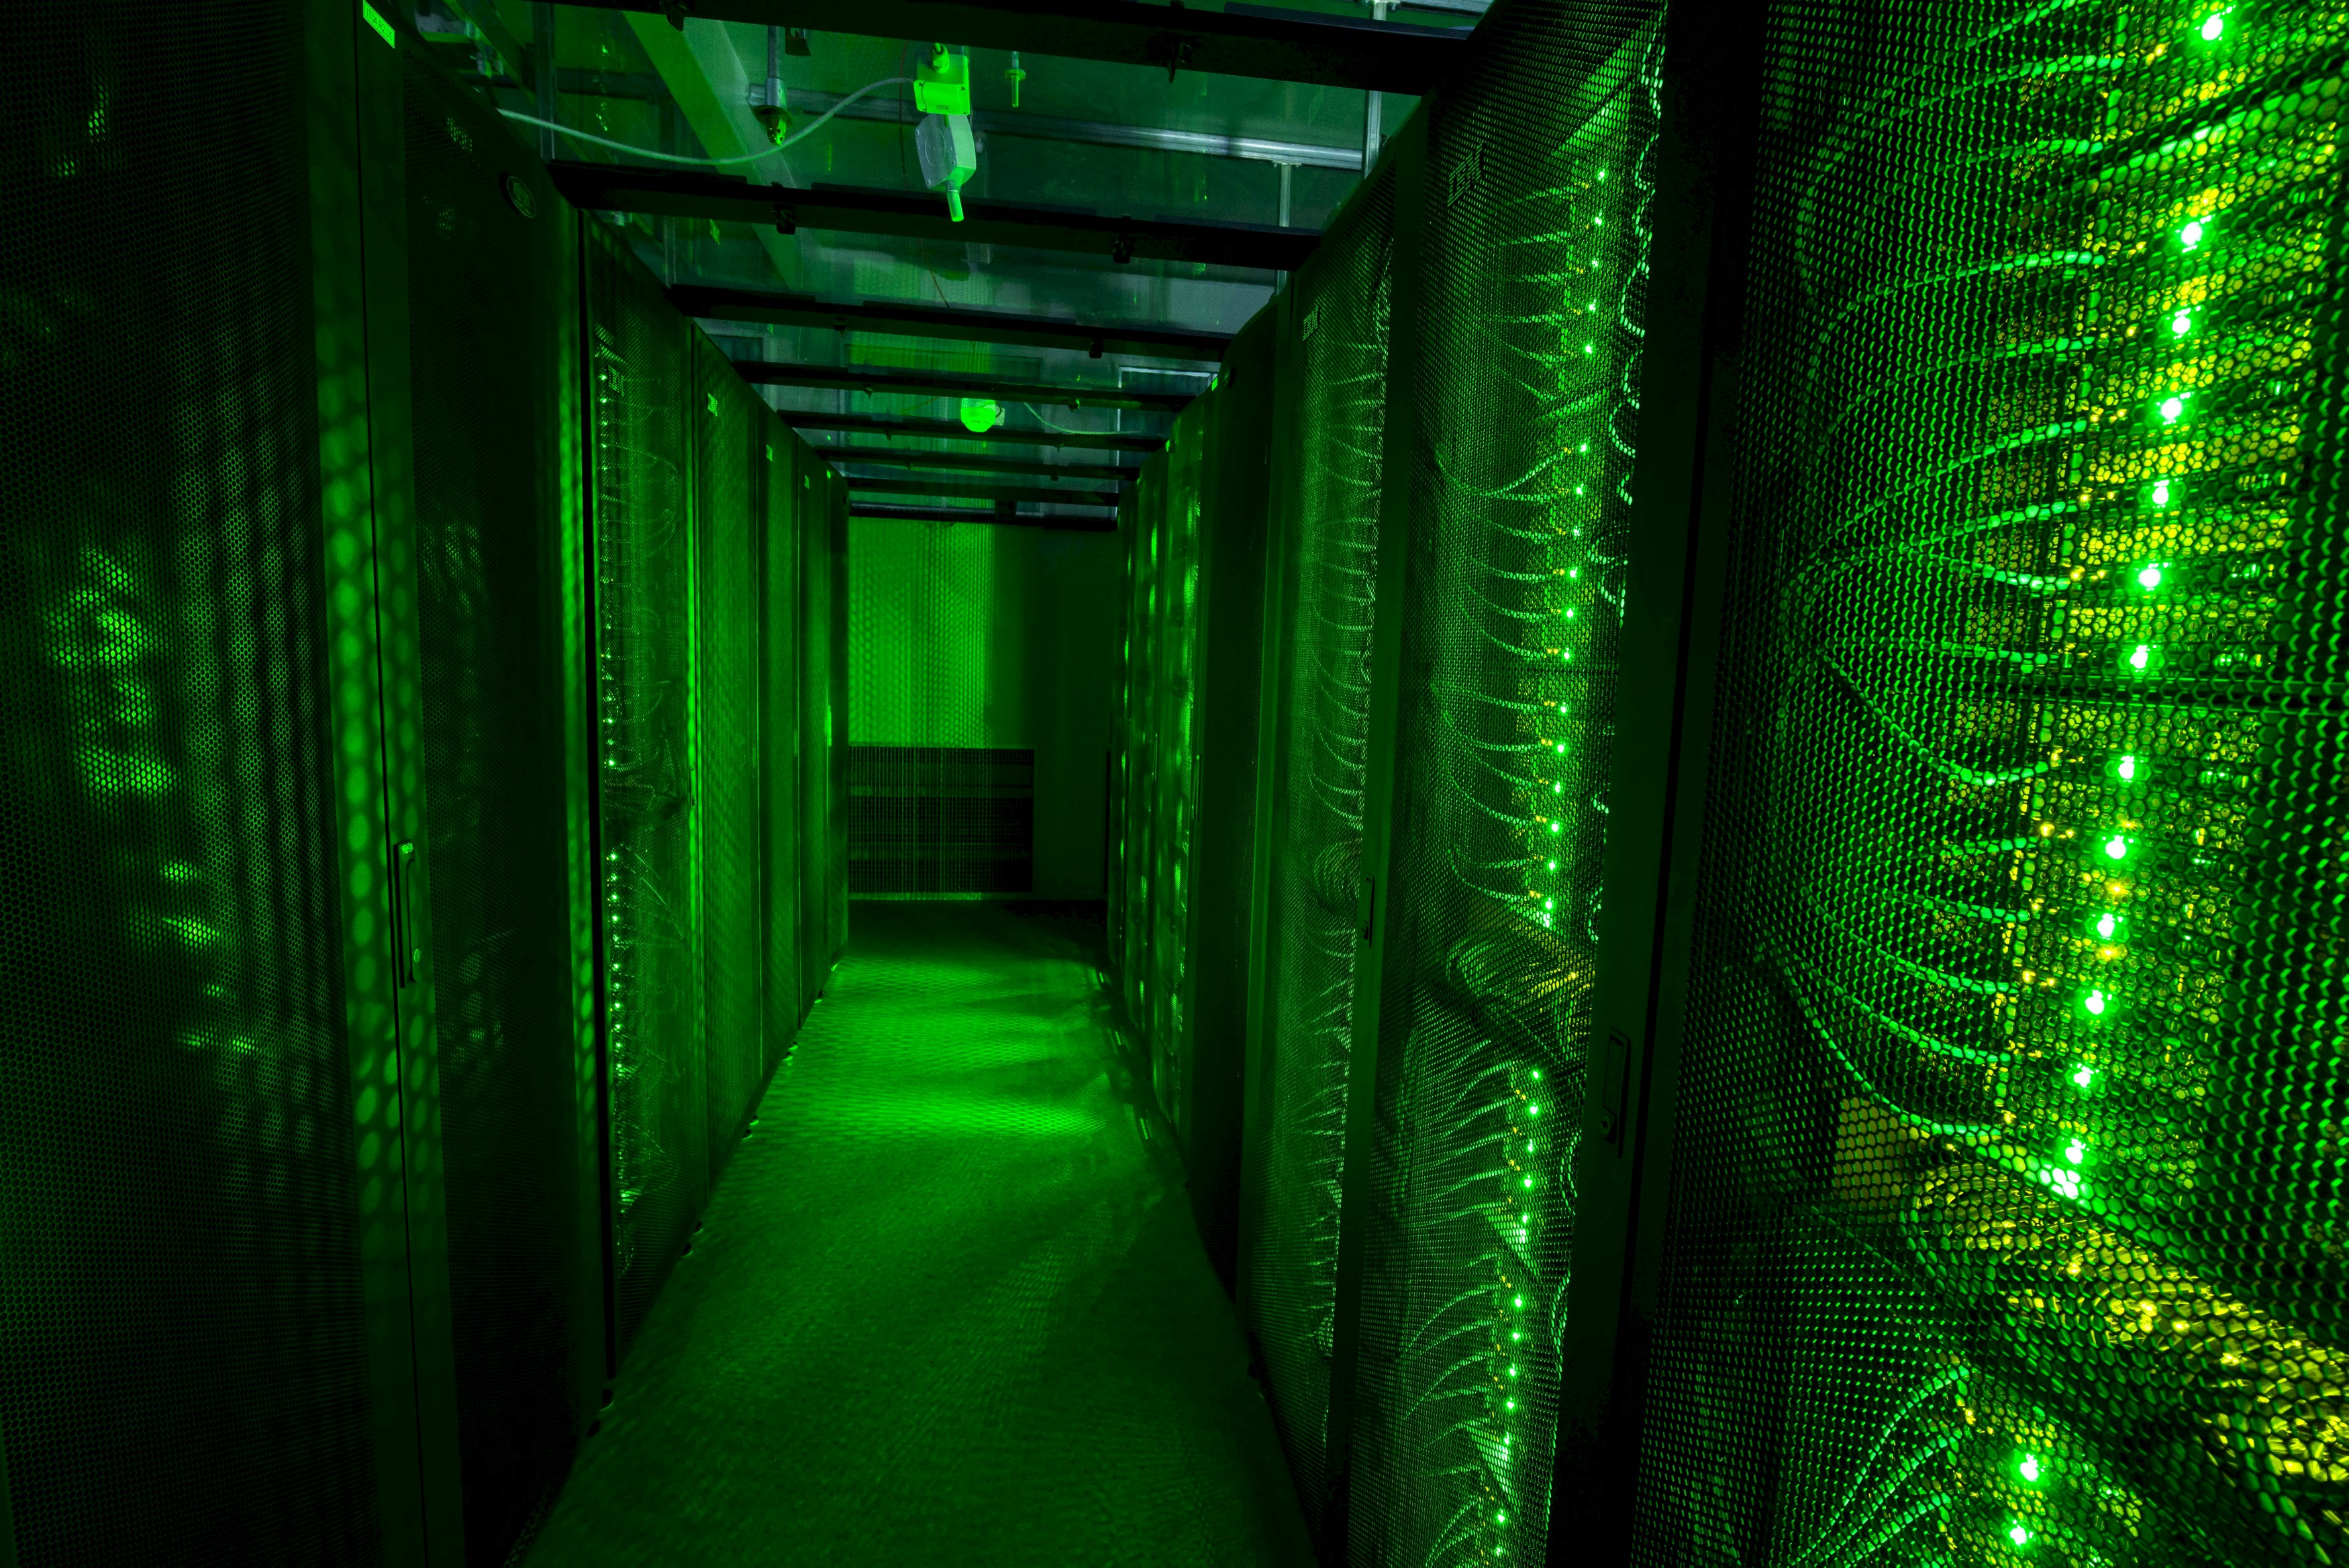 Servers for data storage are seen at Advania's Thor Data Center in Hafnarfjordur, Iceland August 7, 2015. REUTERS/Sigtryggur AriSEARCH â€˜SCIENCE TECHNOLOGYâ€™ FOR ALL 15 IMAGES